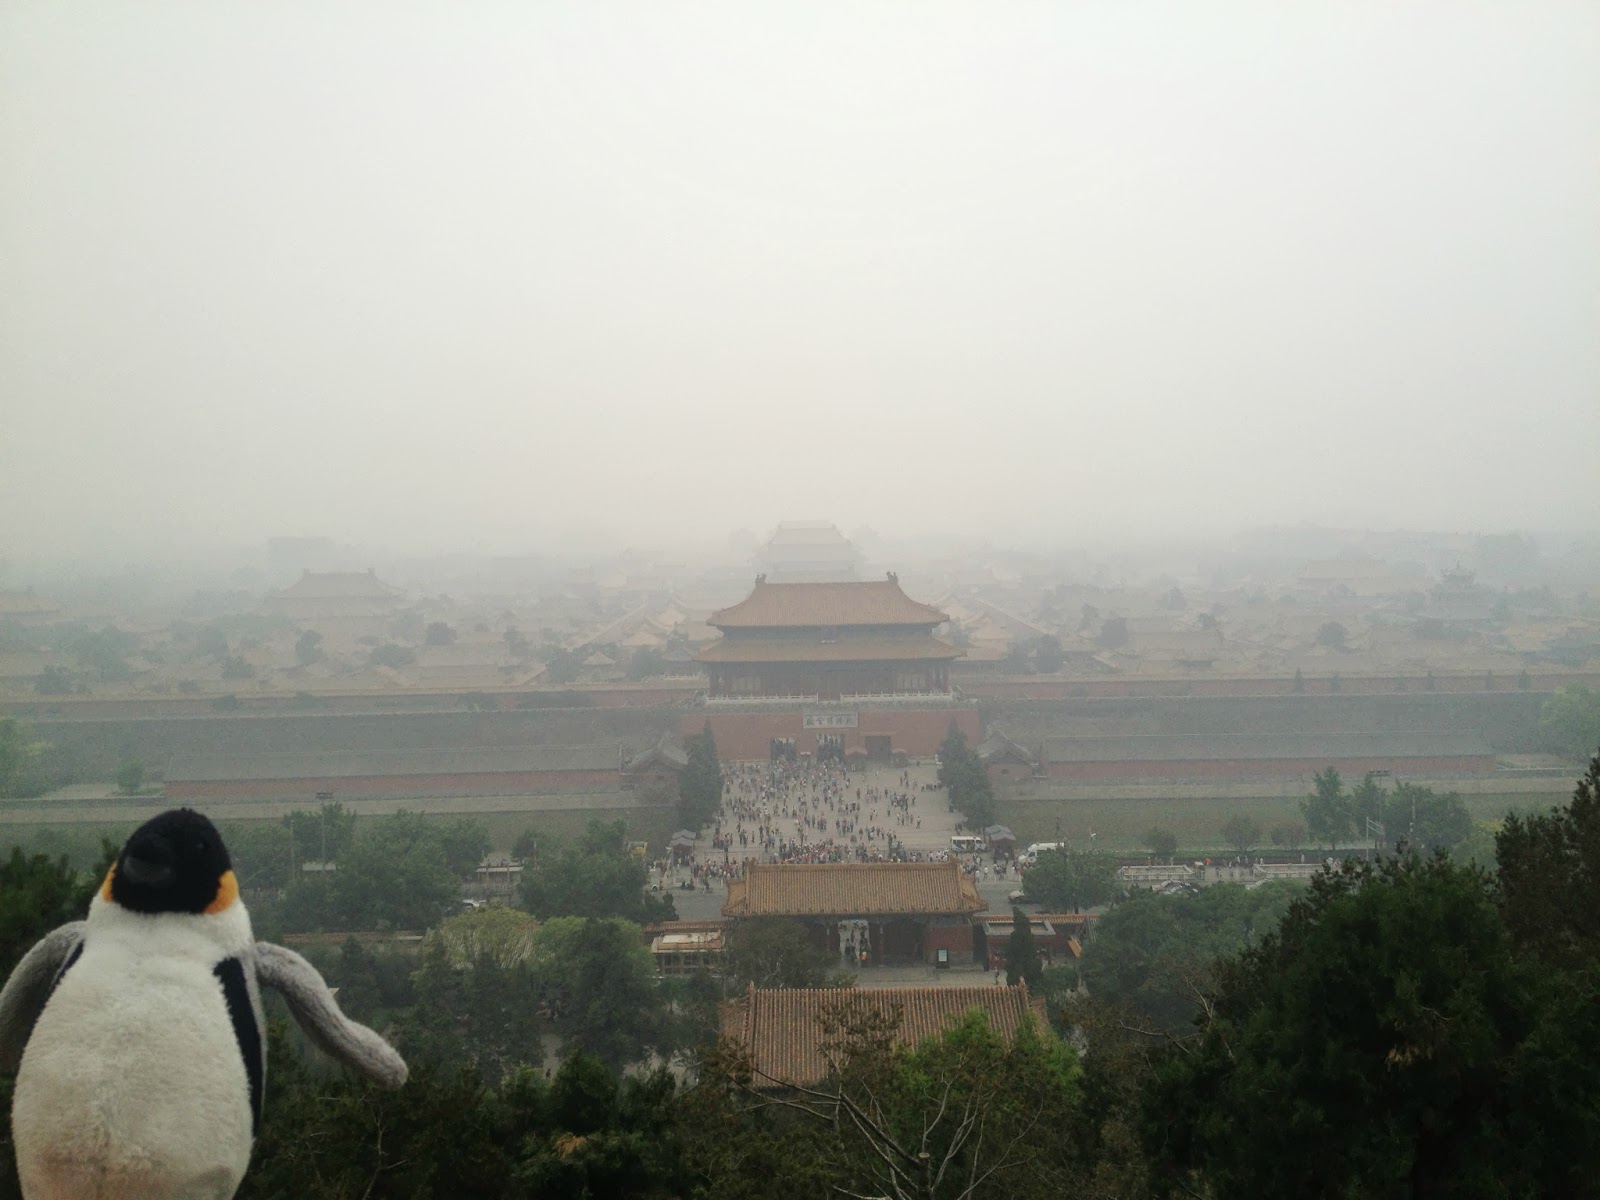 From pavilion atop hill in Jingshan Park, with the Forbidden City in the background.  We are looking south, i.e. the large structure in the center is the northernmost gate of the FC.  We had entered from the south or Meridian gate, about 1 mile beyond and therefore barely visible in the smog.